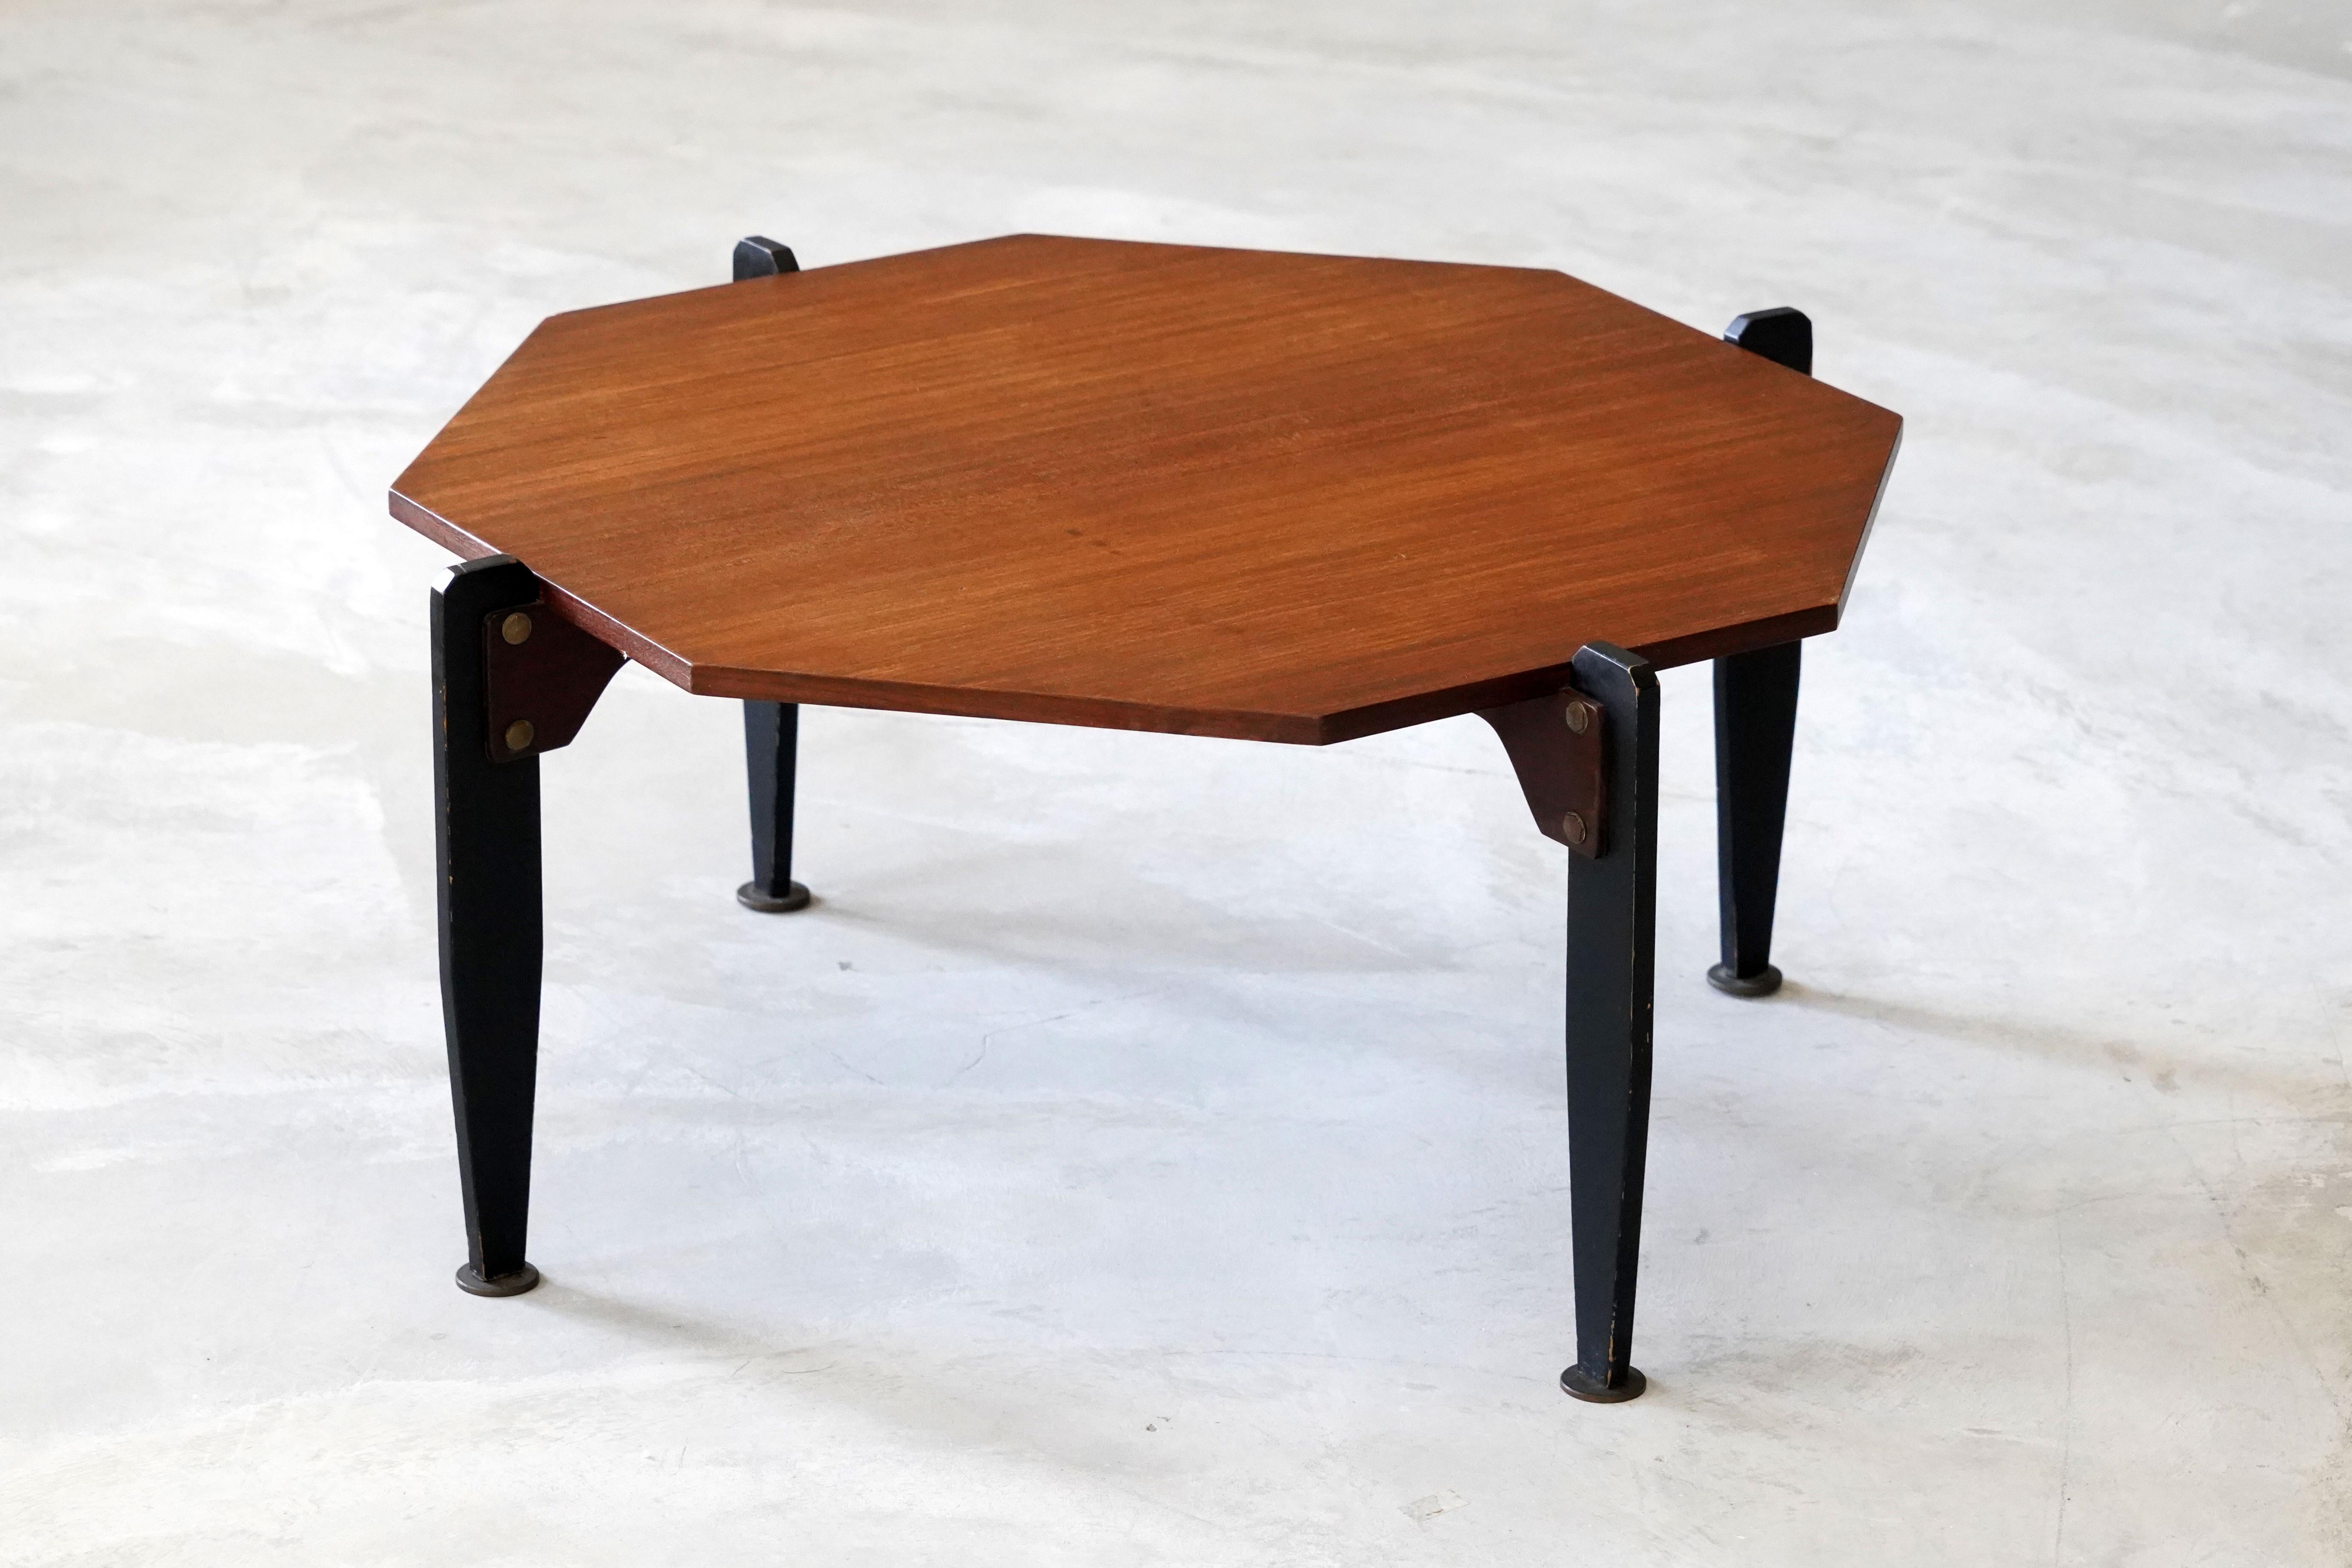 A modernist coffee table / cocktail table. Designed and produced in Italy, 1950s. Executed in stained metal and teak. A light table that can also be utilized as an occasional or end table.

Other designers of the period include Gio Ponti, Ico